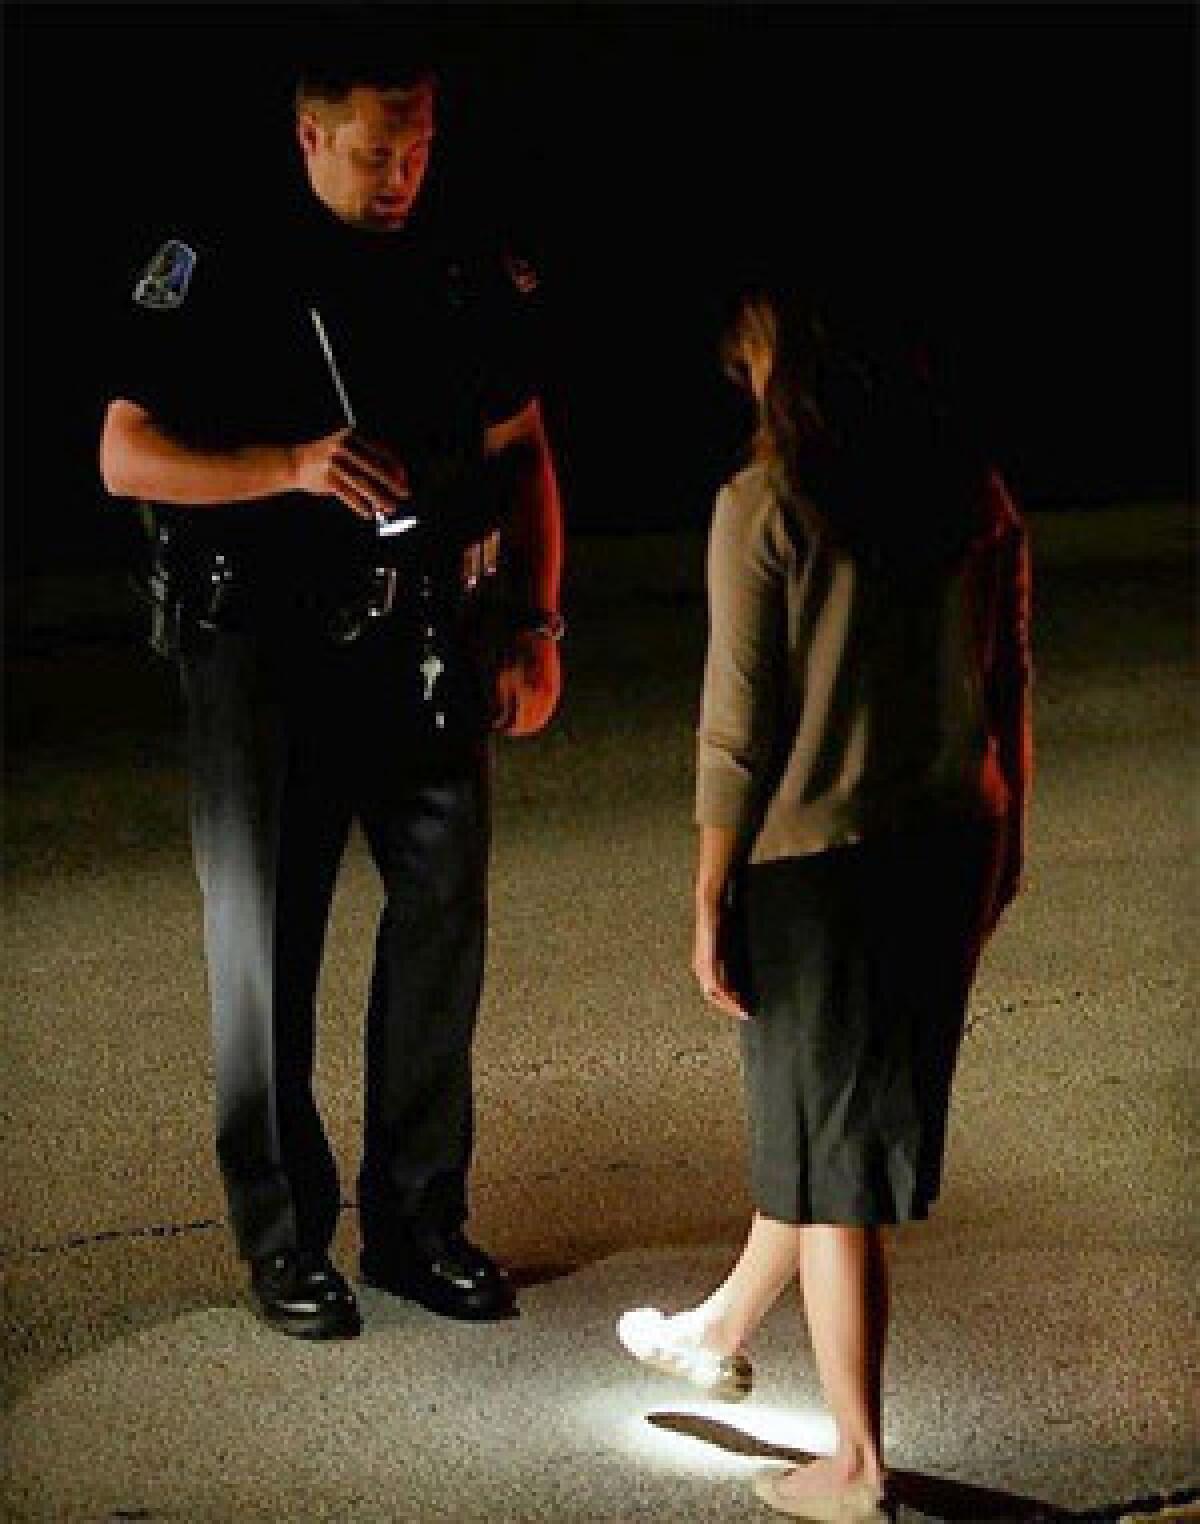 Officer James Waites conducts a field sobriety test in Mundelein, Ill., in 2009. The Supreme Court has agreed to review a Missouri case in which a suspected drunk driver was forced to undergo a blood test.